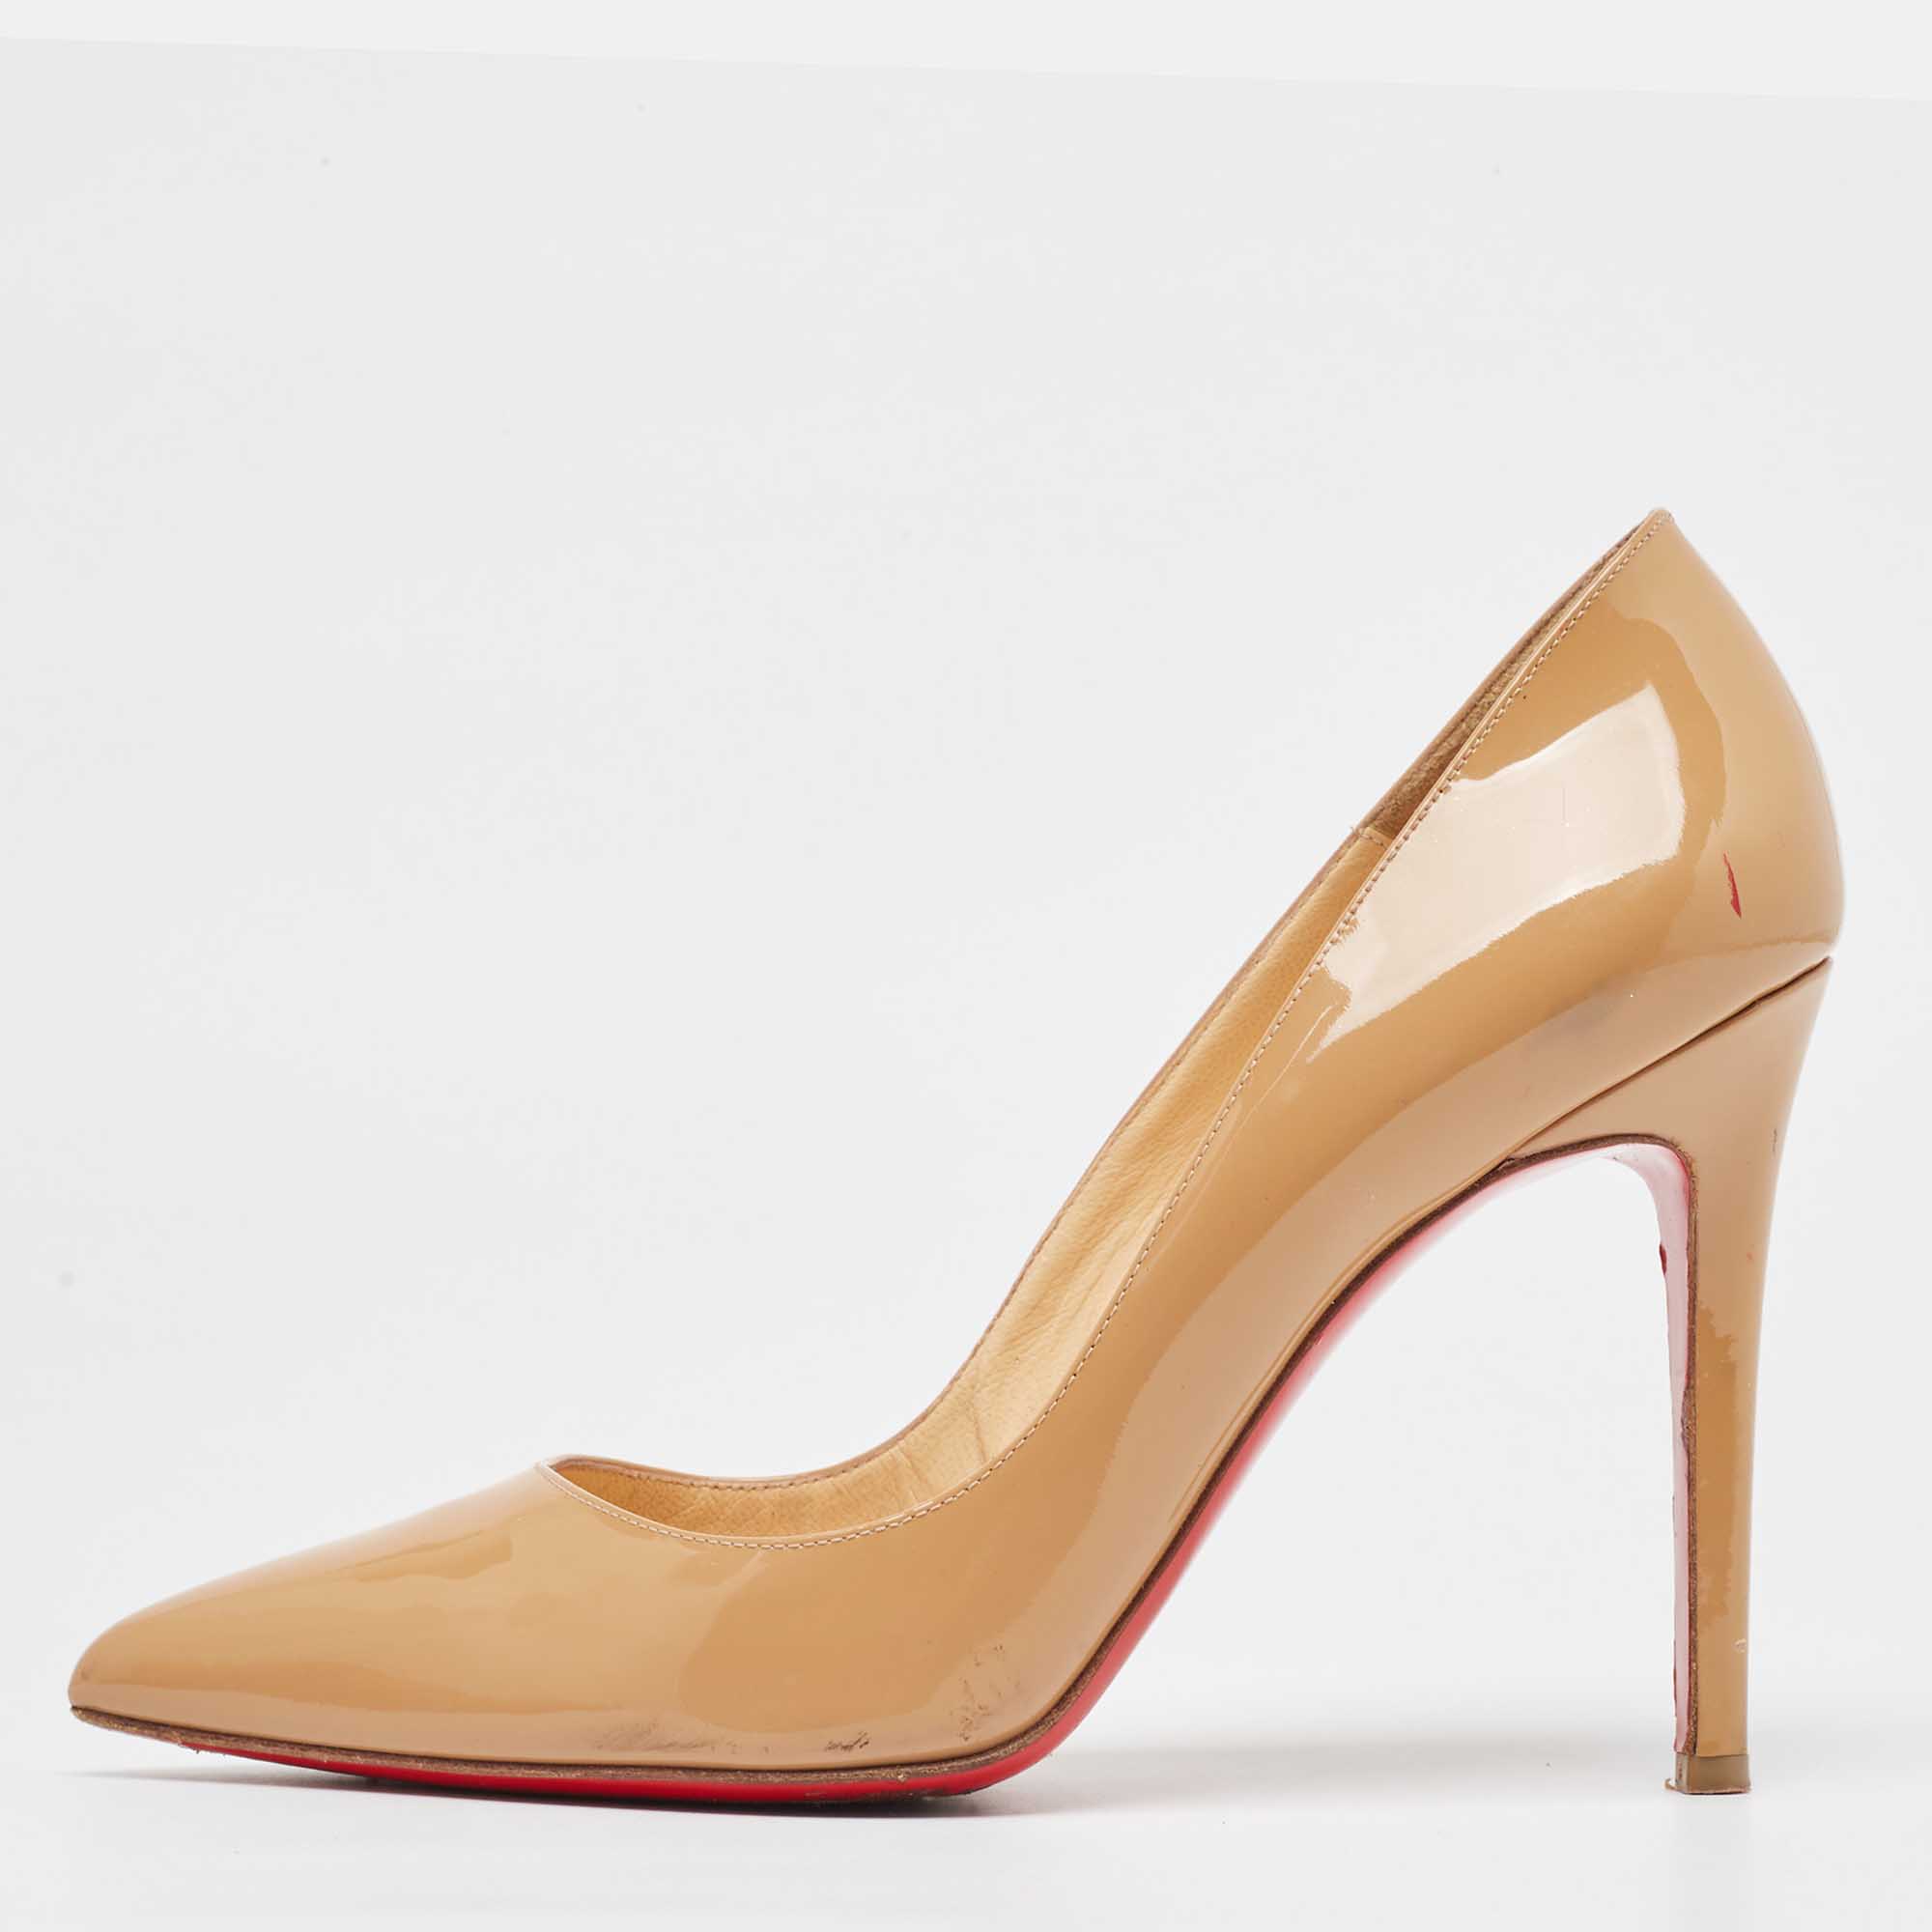 Christian louboutin beige patent leather pigalle pumps size 39